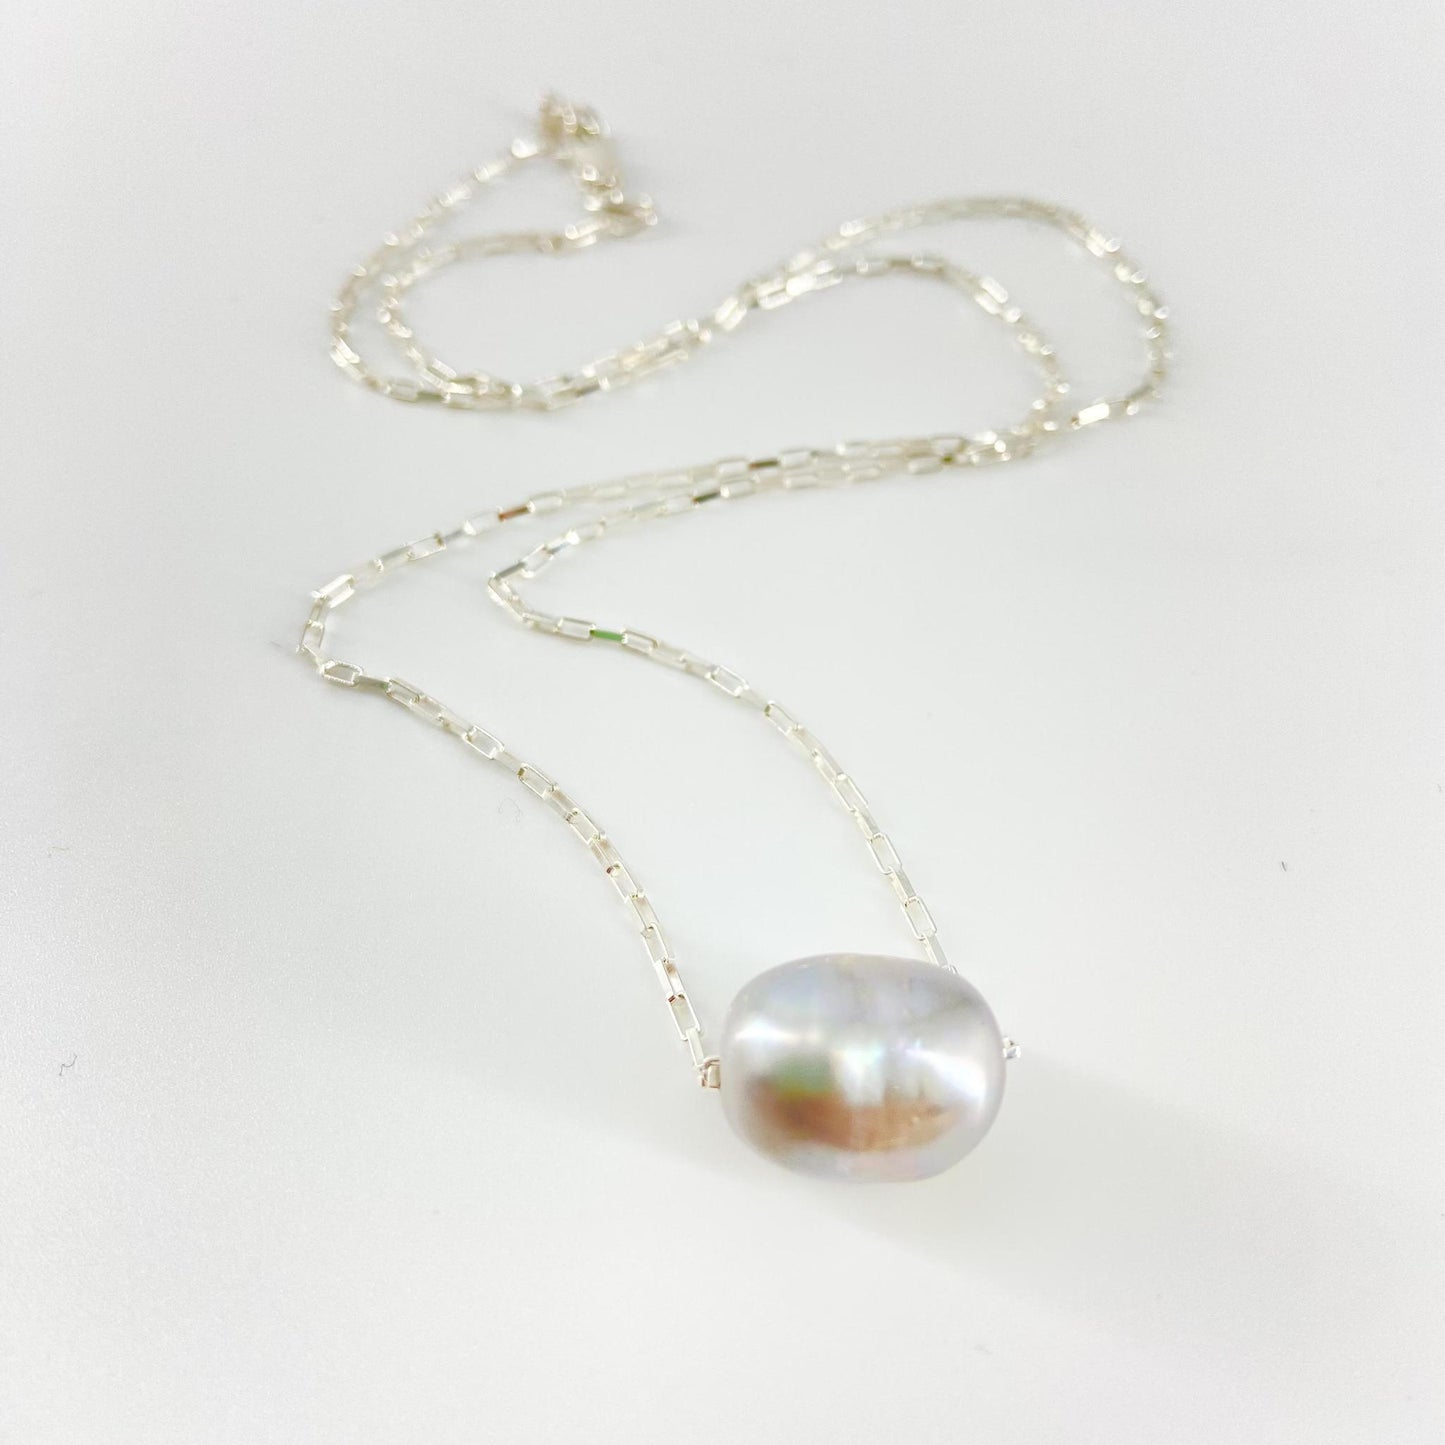 Necklace - Grey Pearl on Sterling Chain - 20"